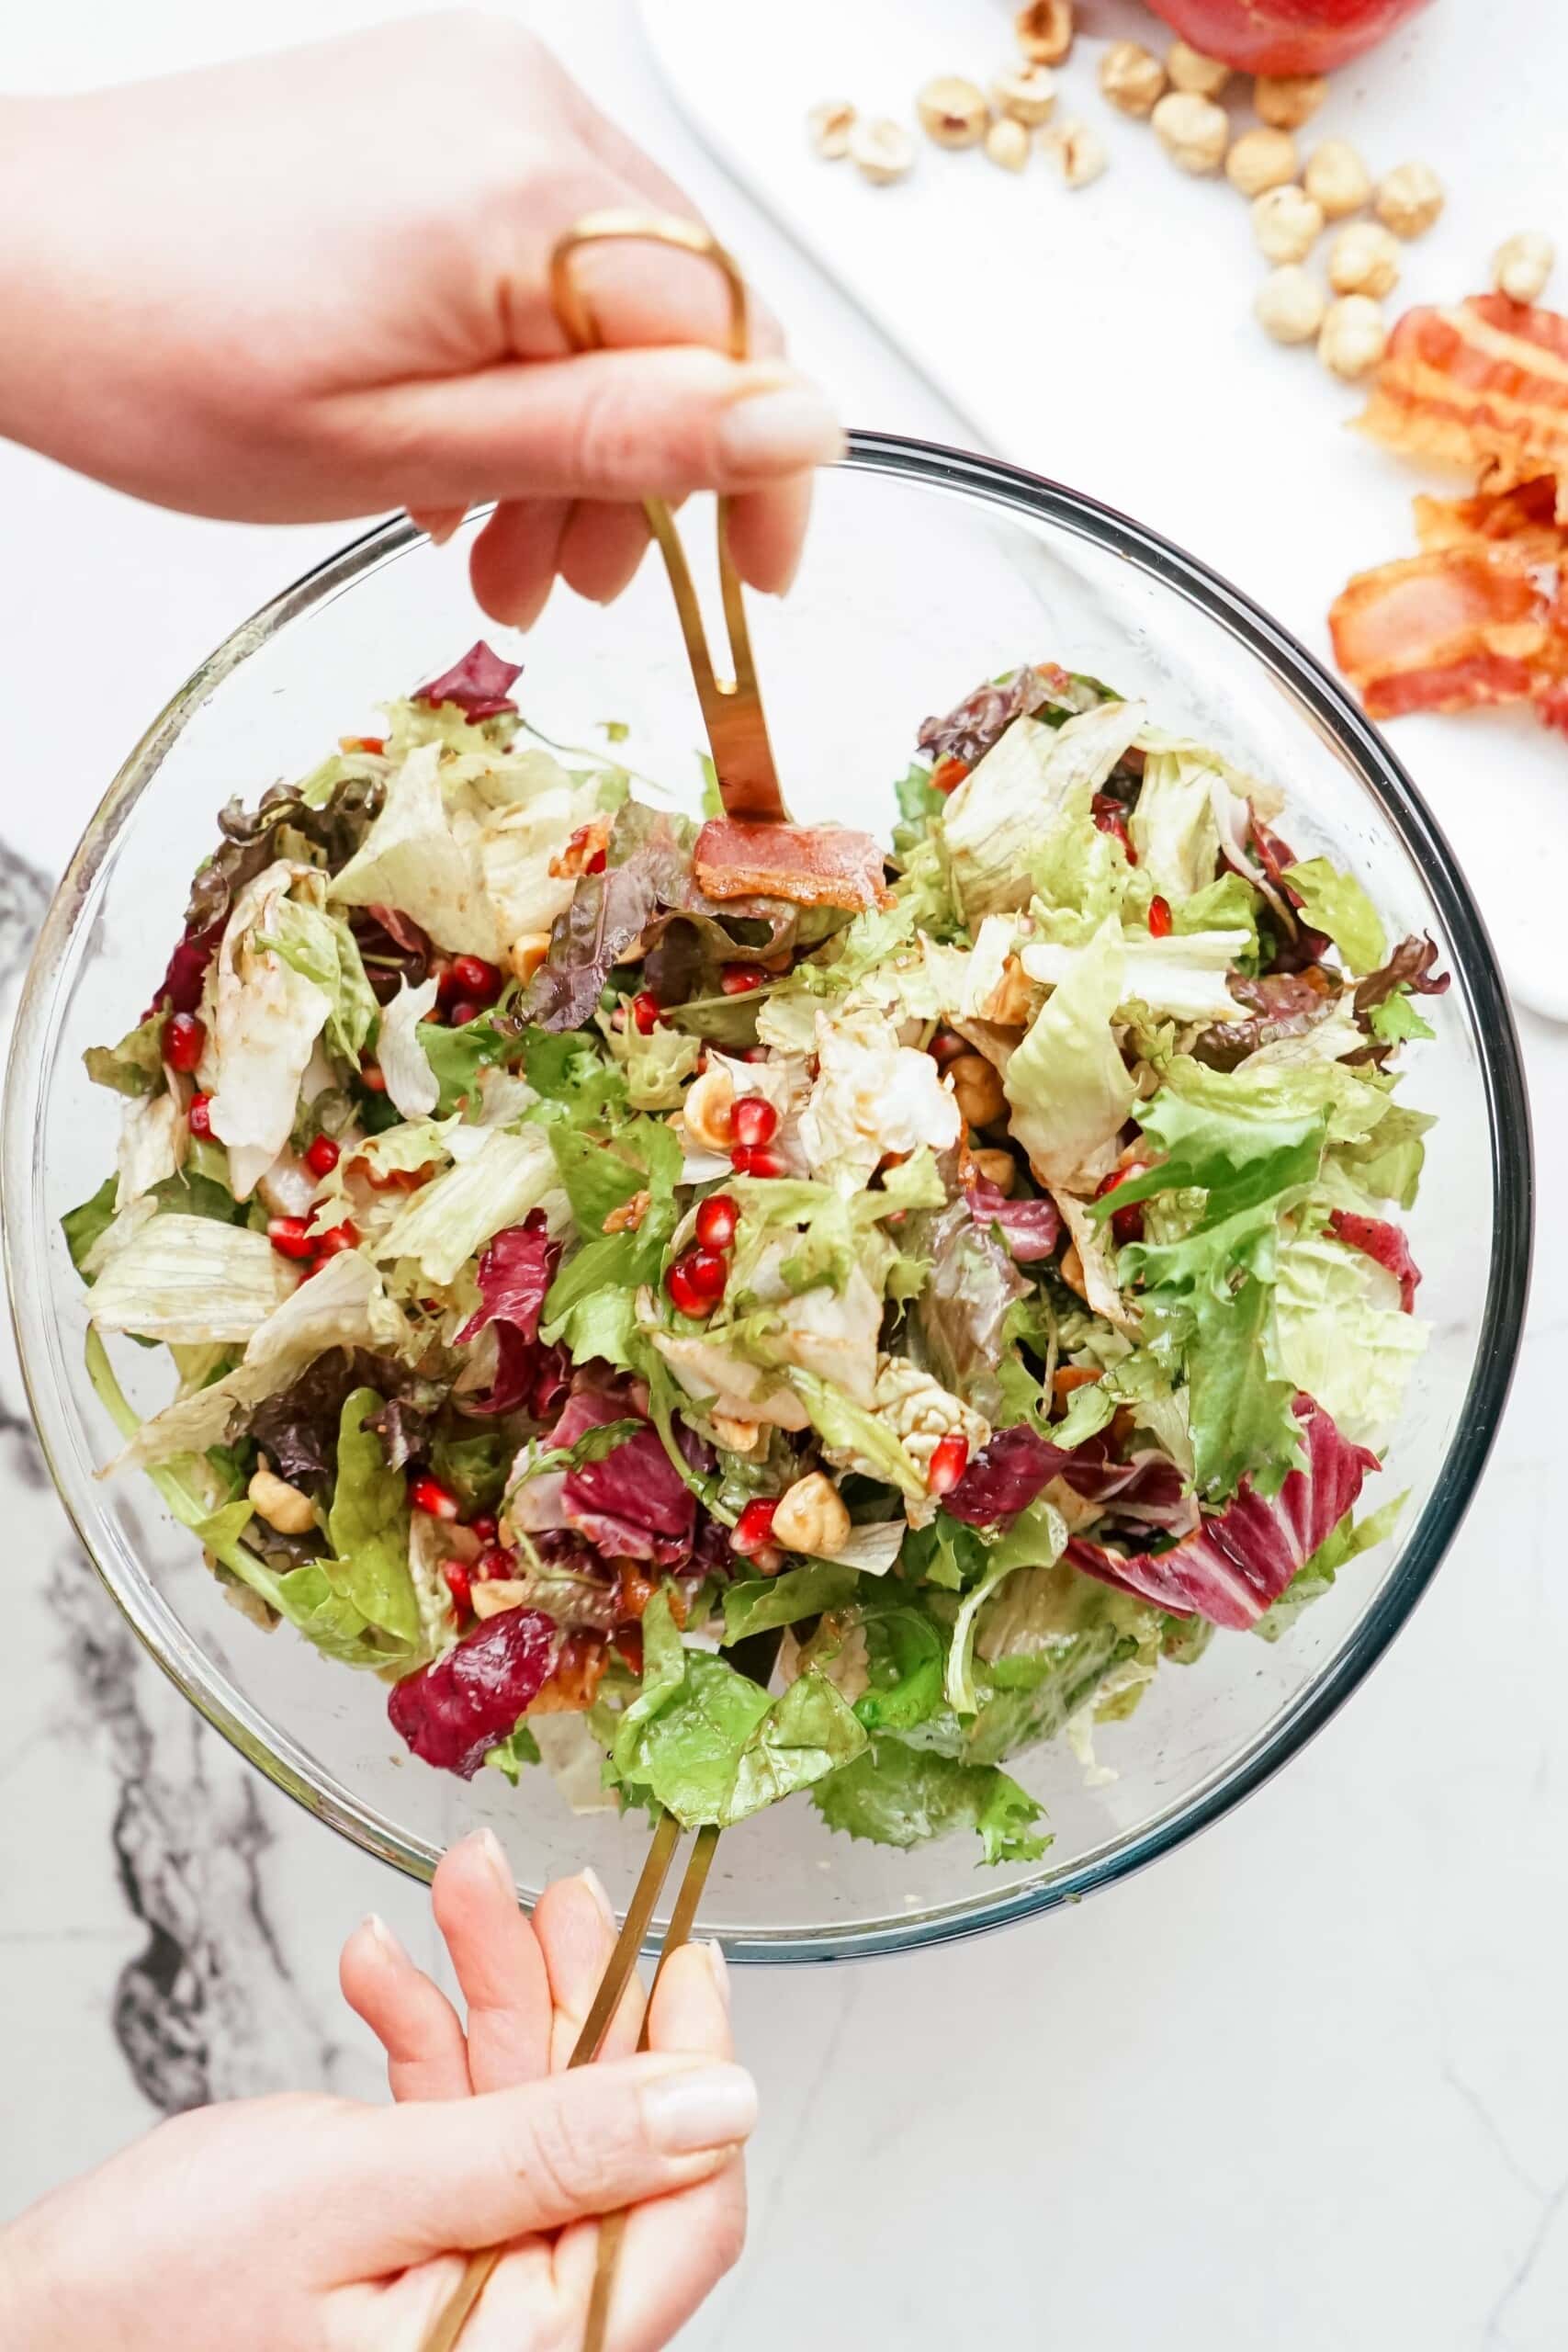 tossing salad and dressing together